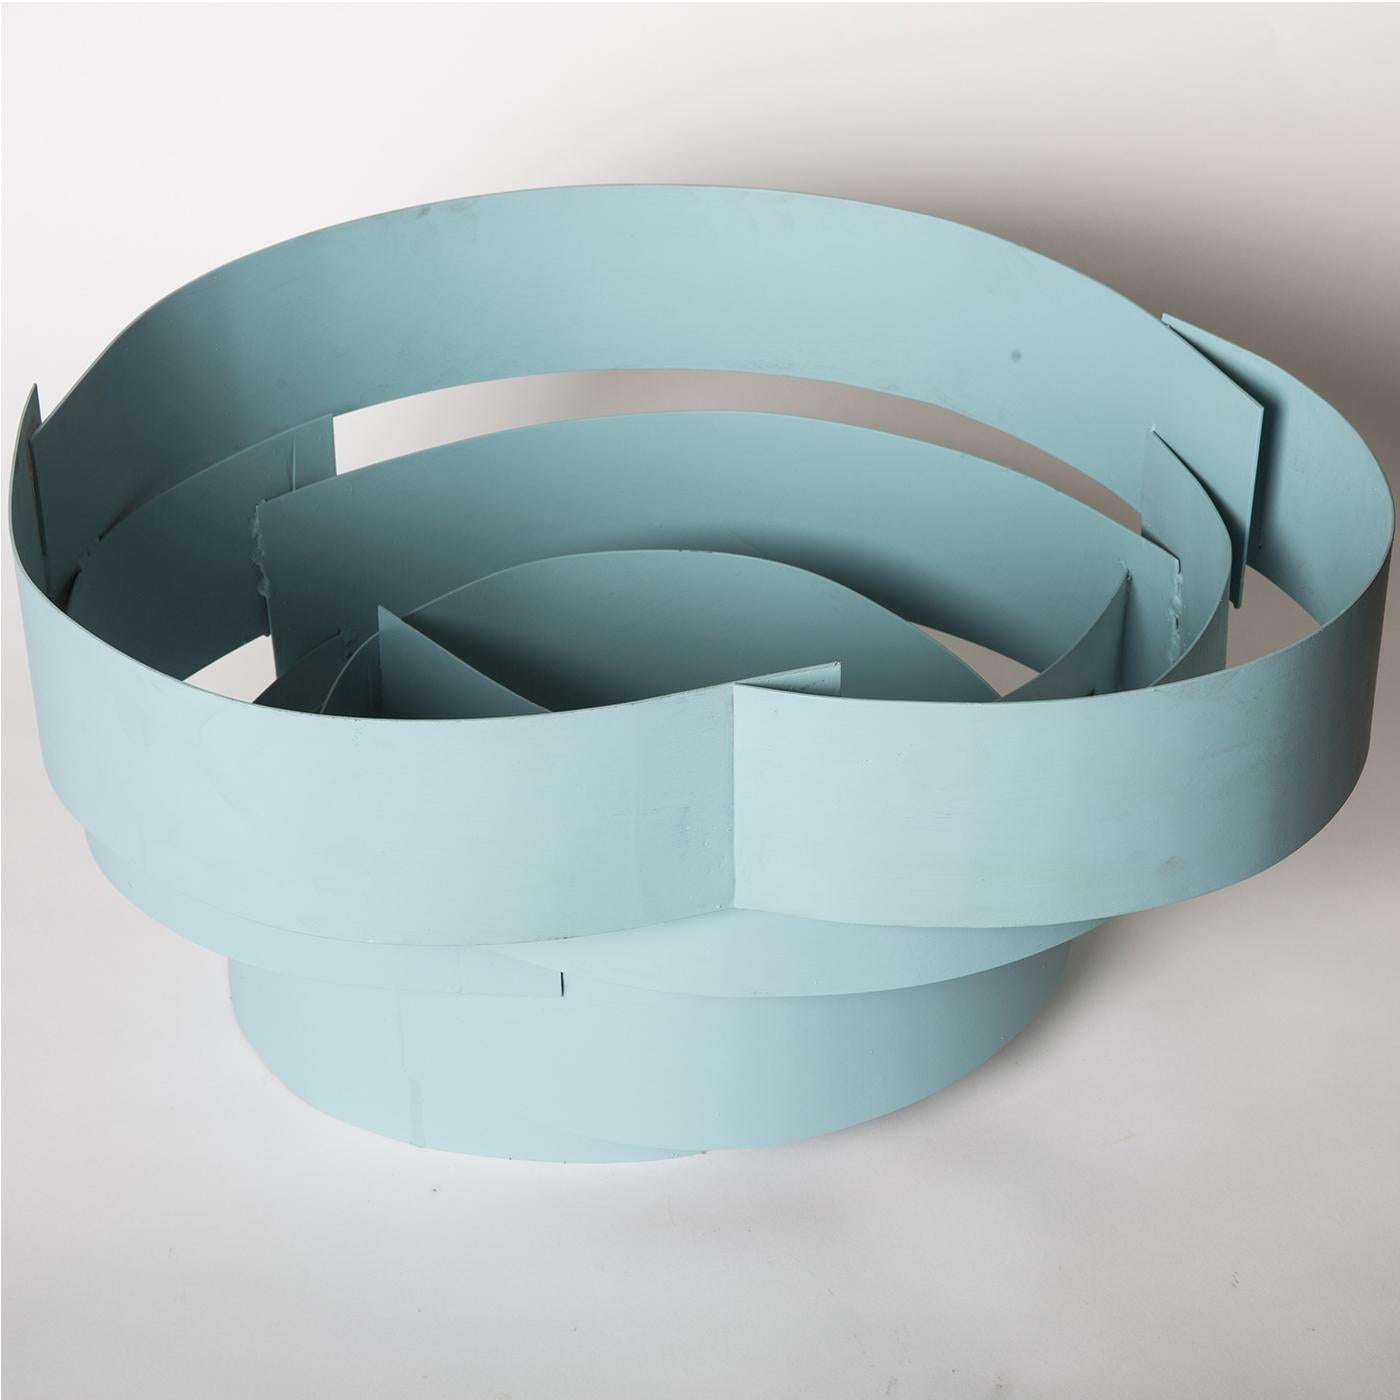 This handmade metal piece has been varnished a light blue color. Each piece is a one-of-a-kind and varies slightly in size and shape. Sculptural and strong, this piece brings the signature Sciortino style into your home. 



  